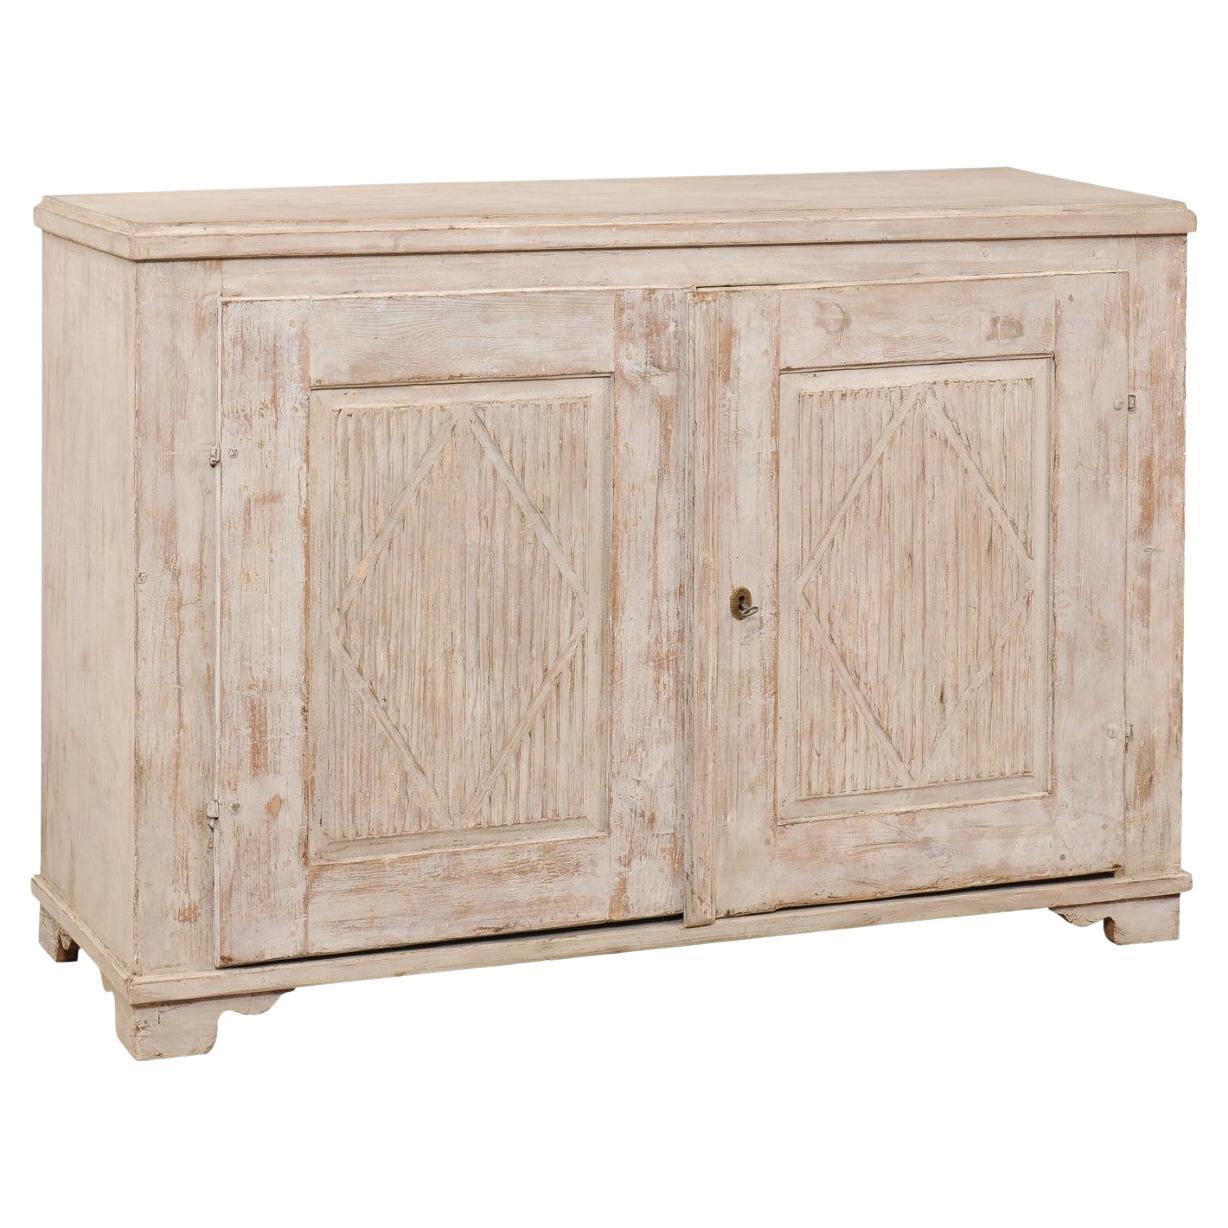 Swedish Gustavian Period 1820s Painted Sideboard with Reeded Doors and Diamonds For Sale